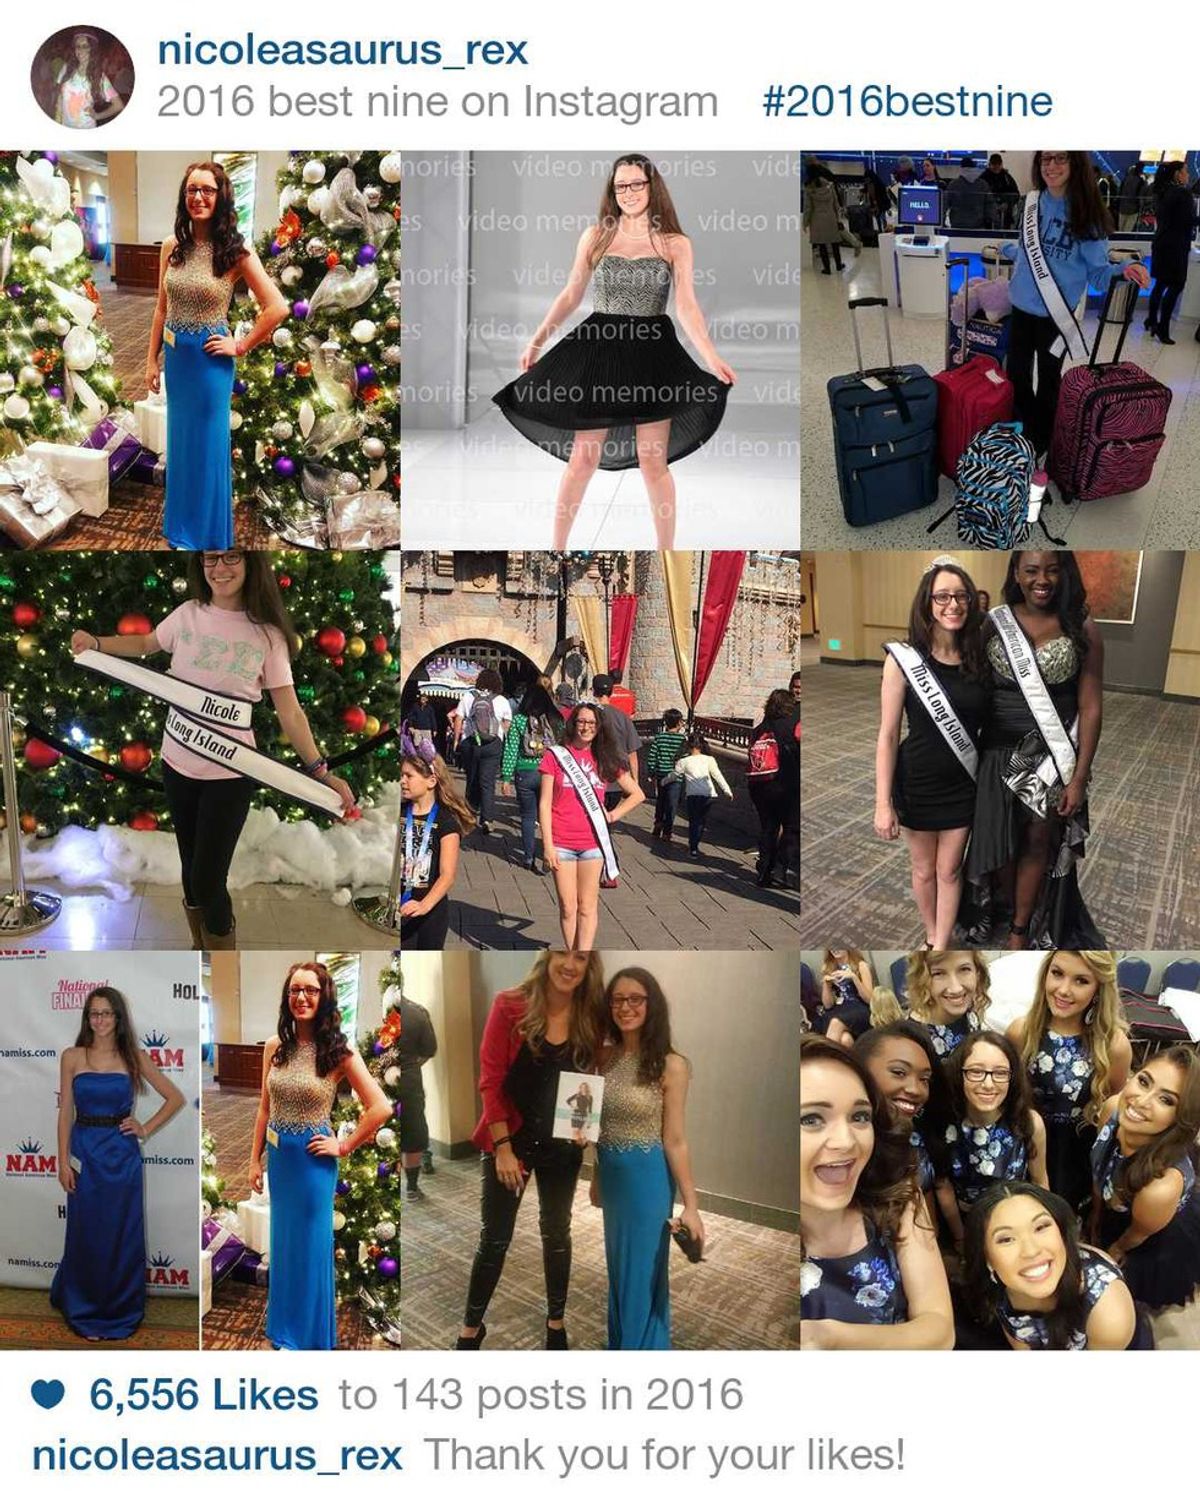 2016: My Personal Year in Review